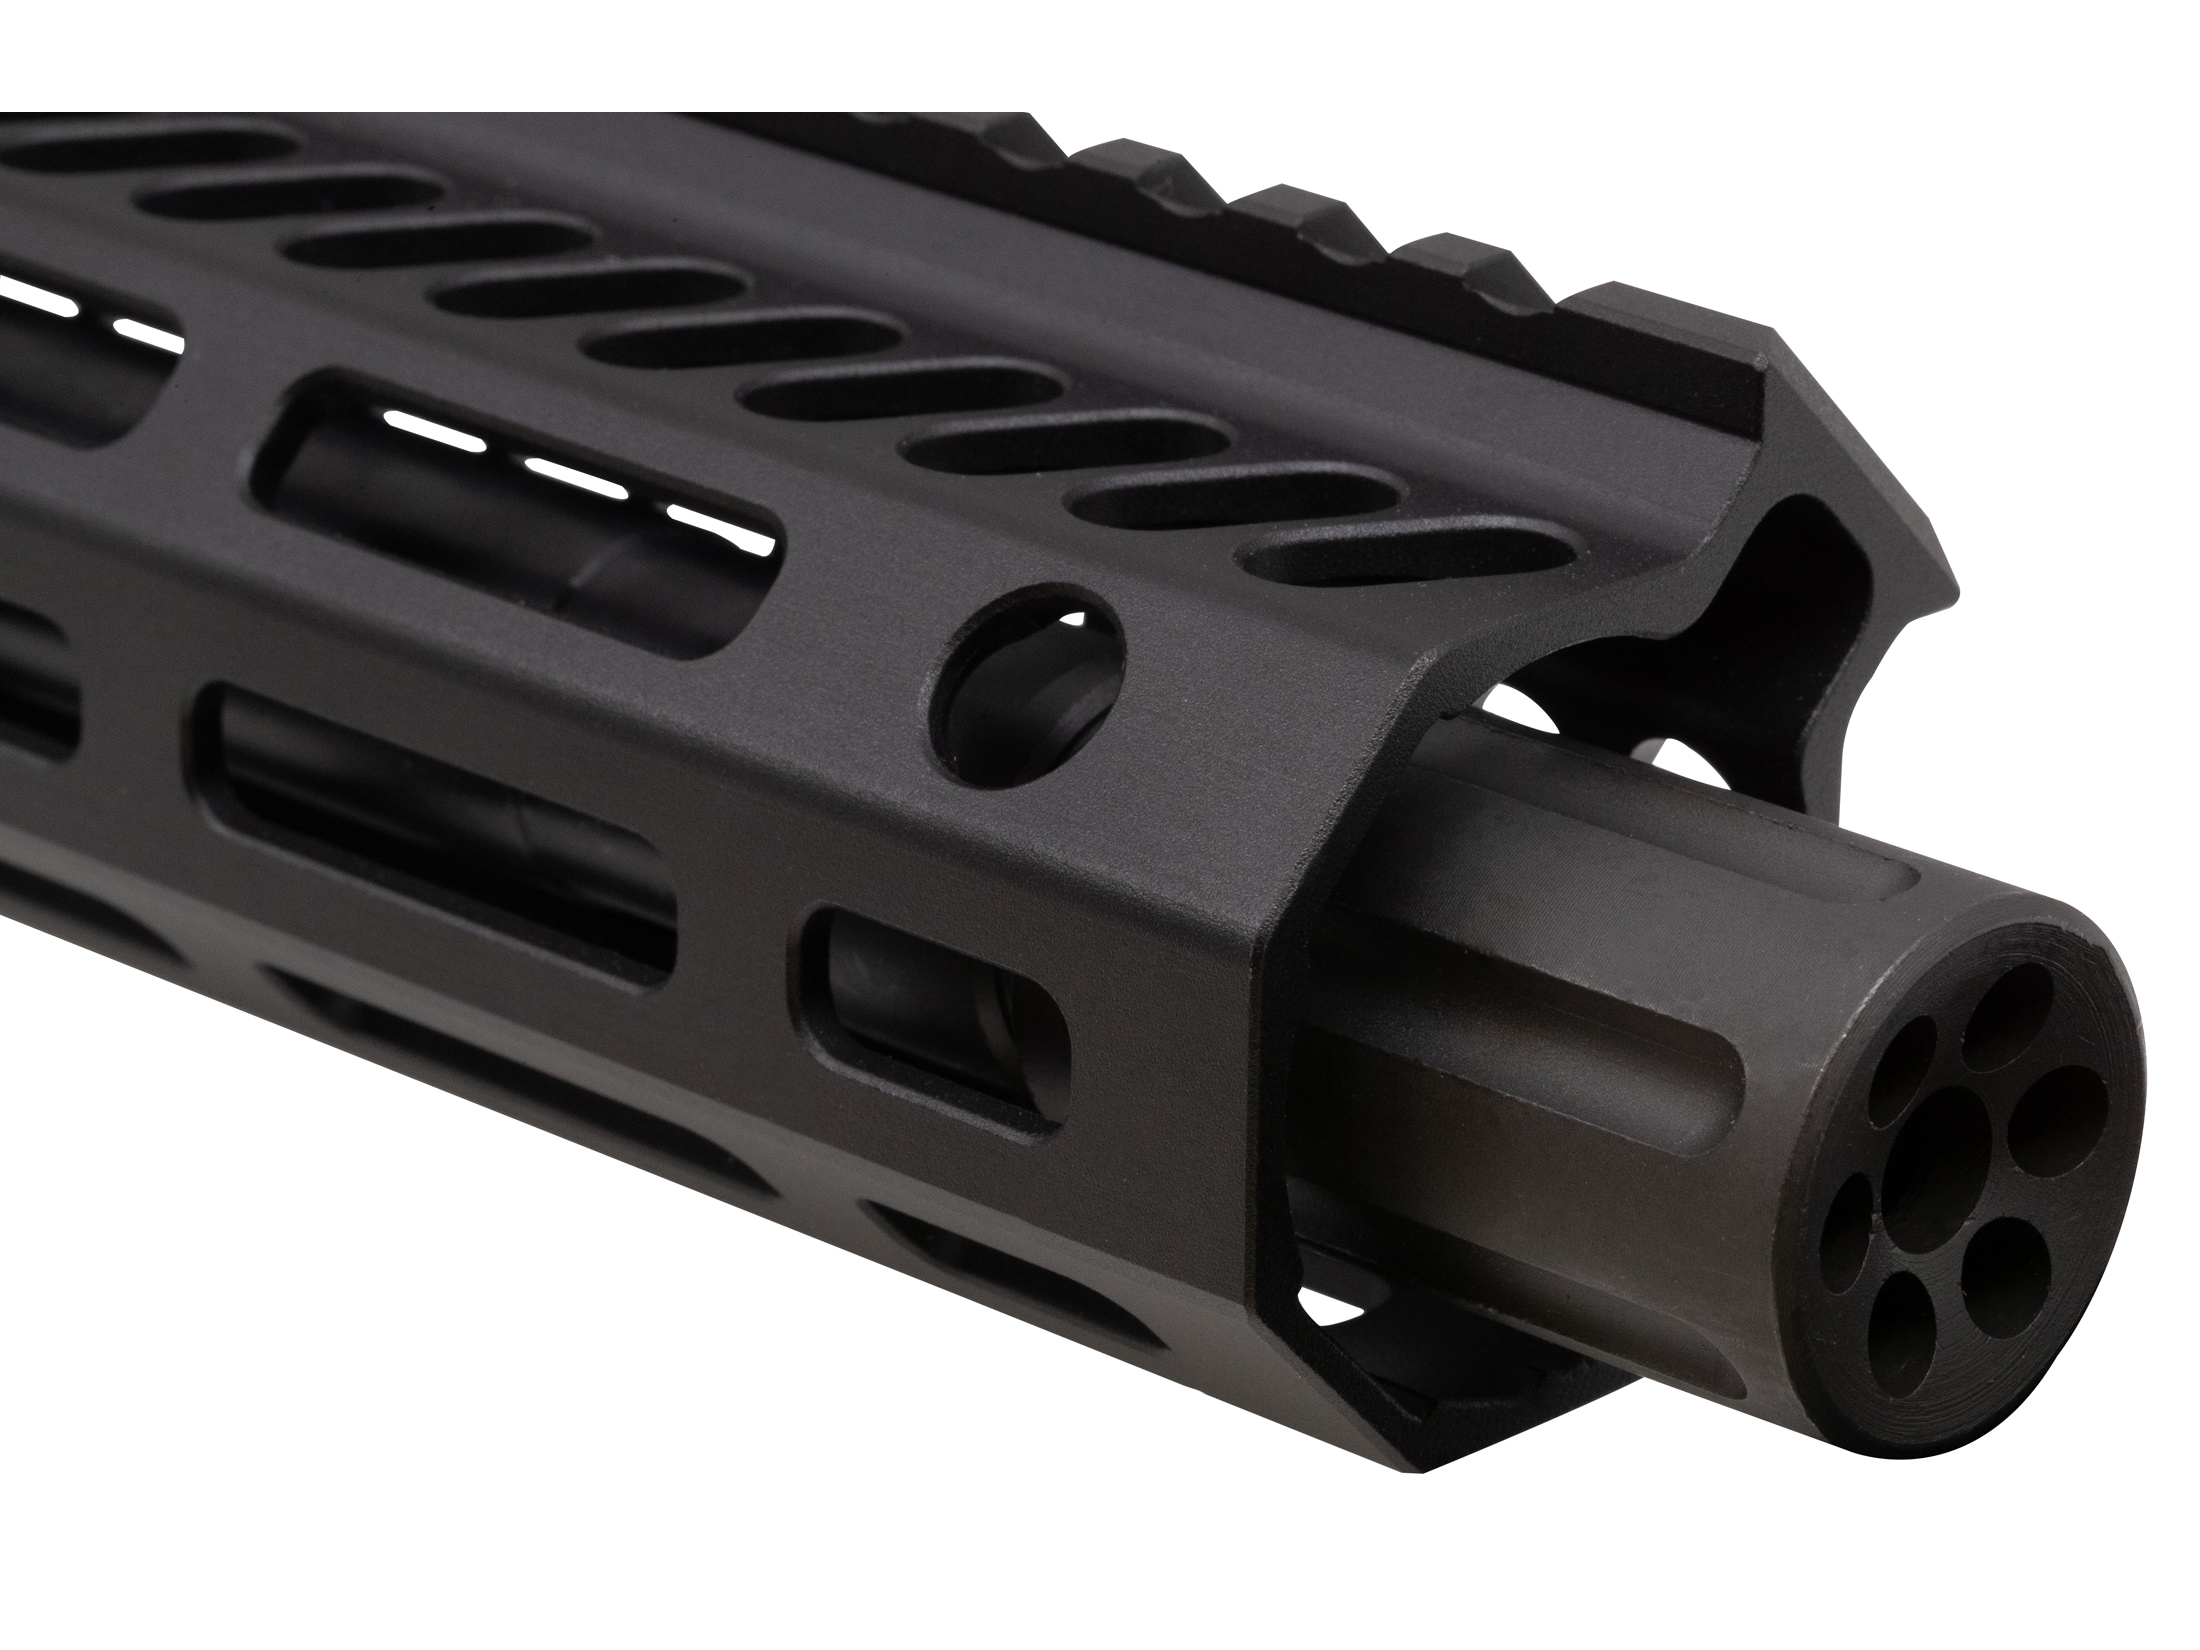 Triple-TAC PLUS 1/2x28 Muzzle Brake with Sound forwarder BORED TO SUIT 